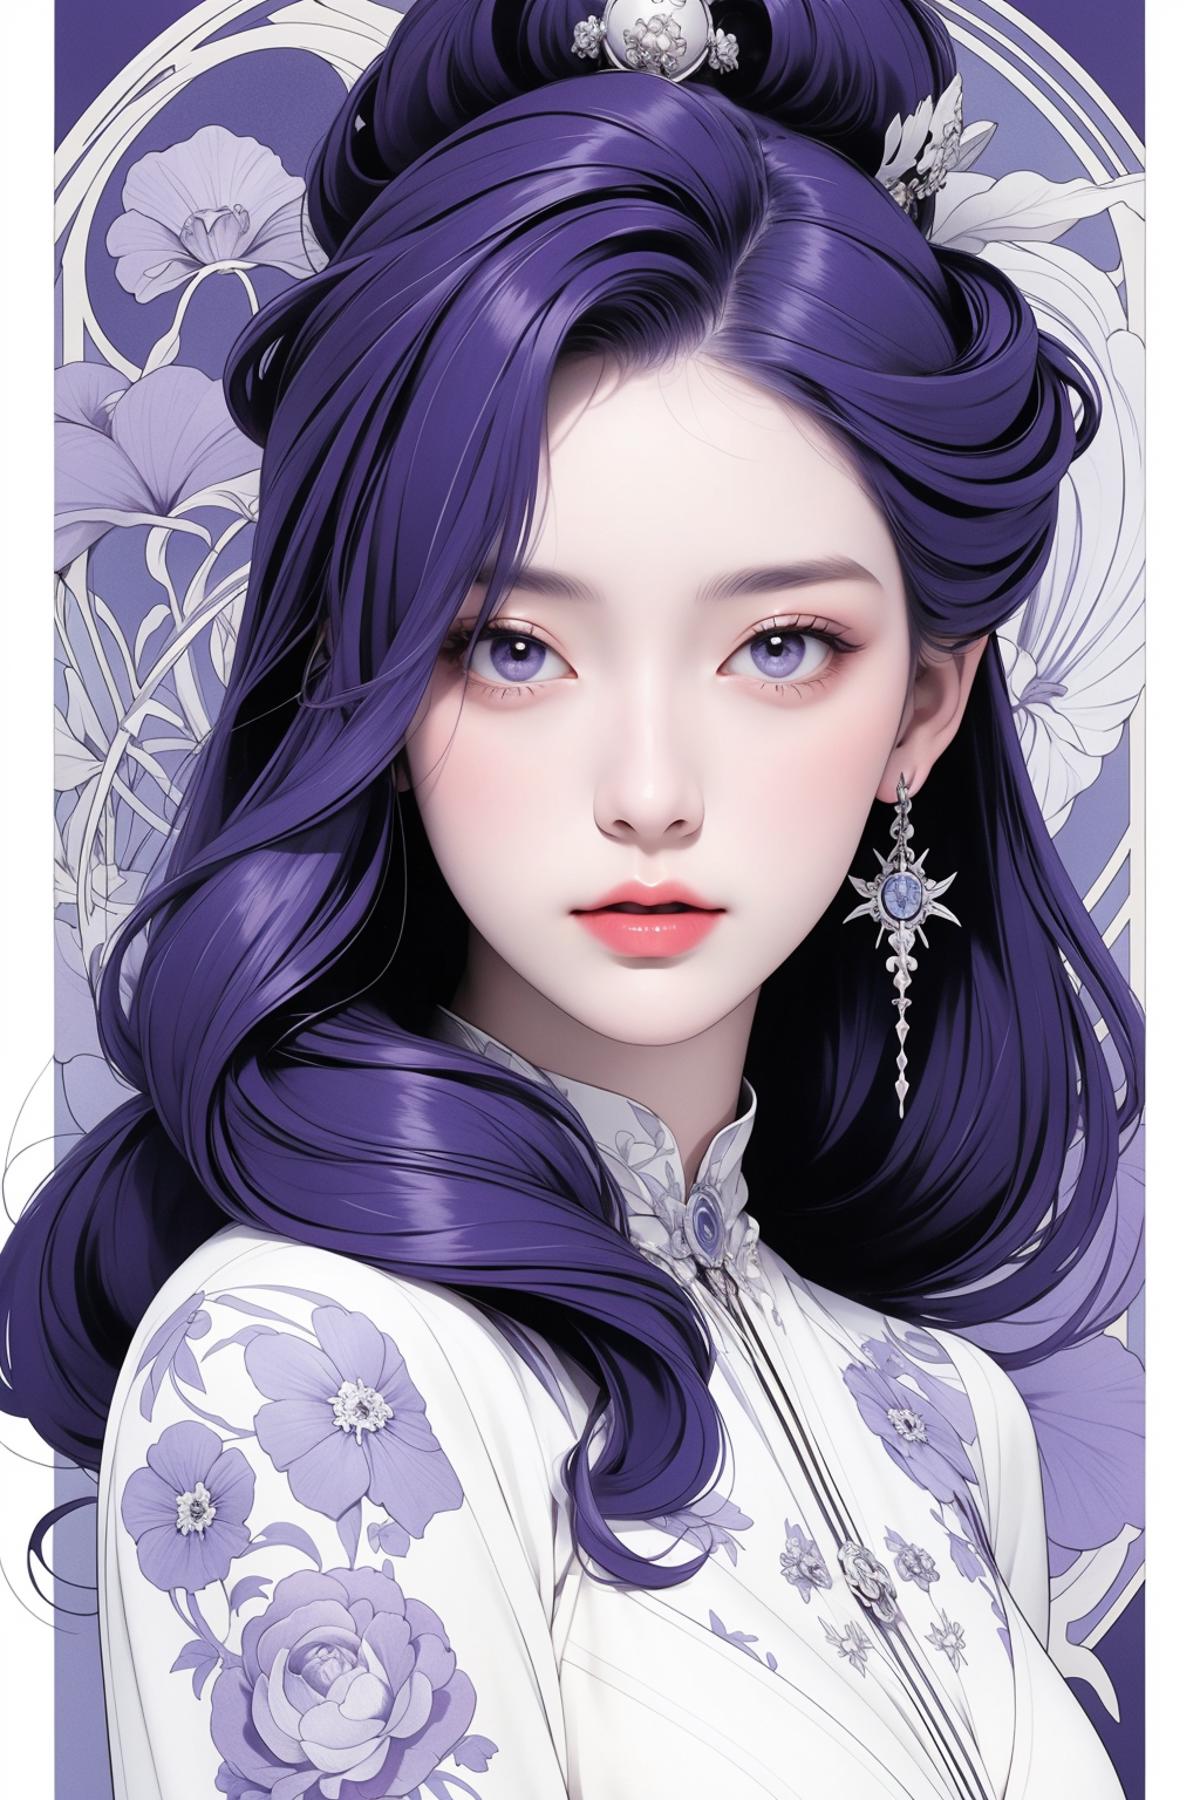 A digital painting of a woman with purple hair and a white dress.